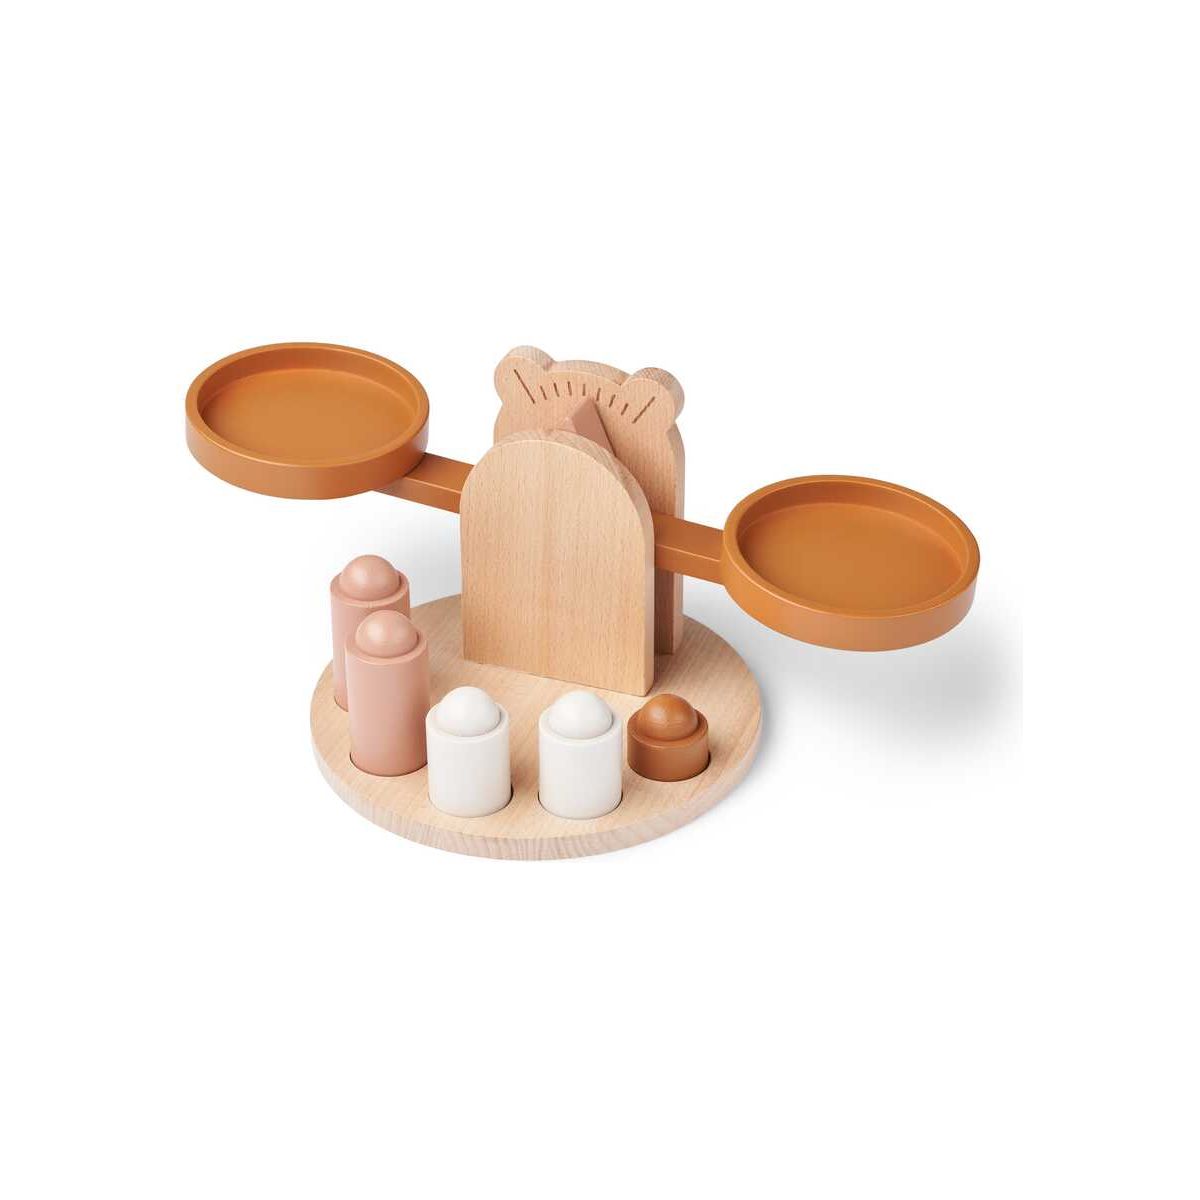 Liewood - Ronni Scale Set - Spielzeugwaage aus 100% Holz - Tuscany ros